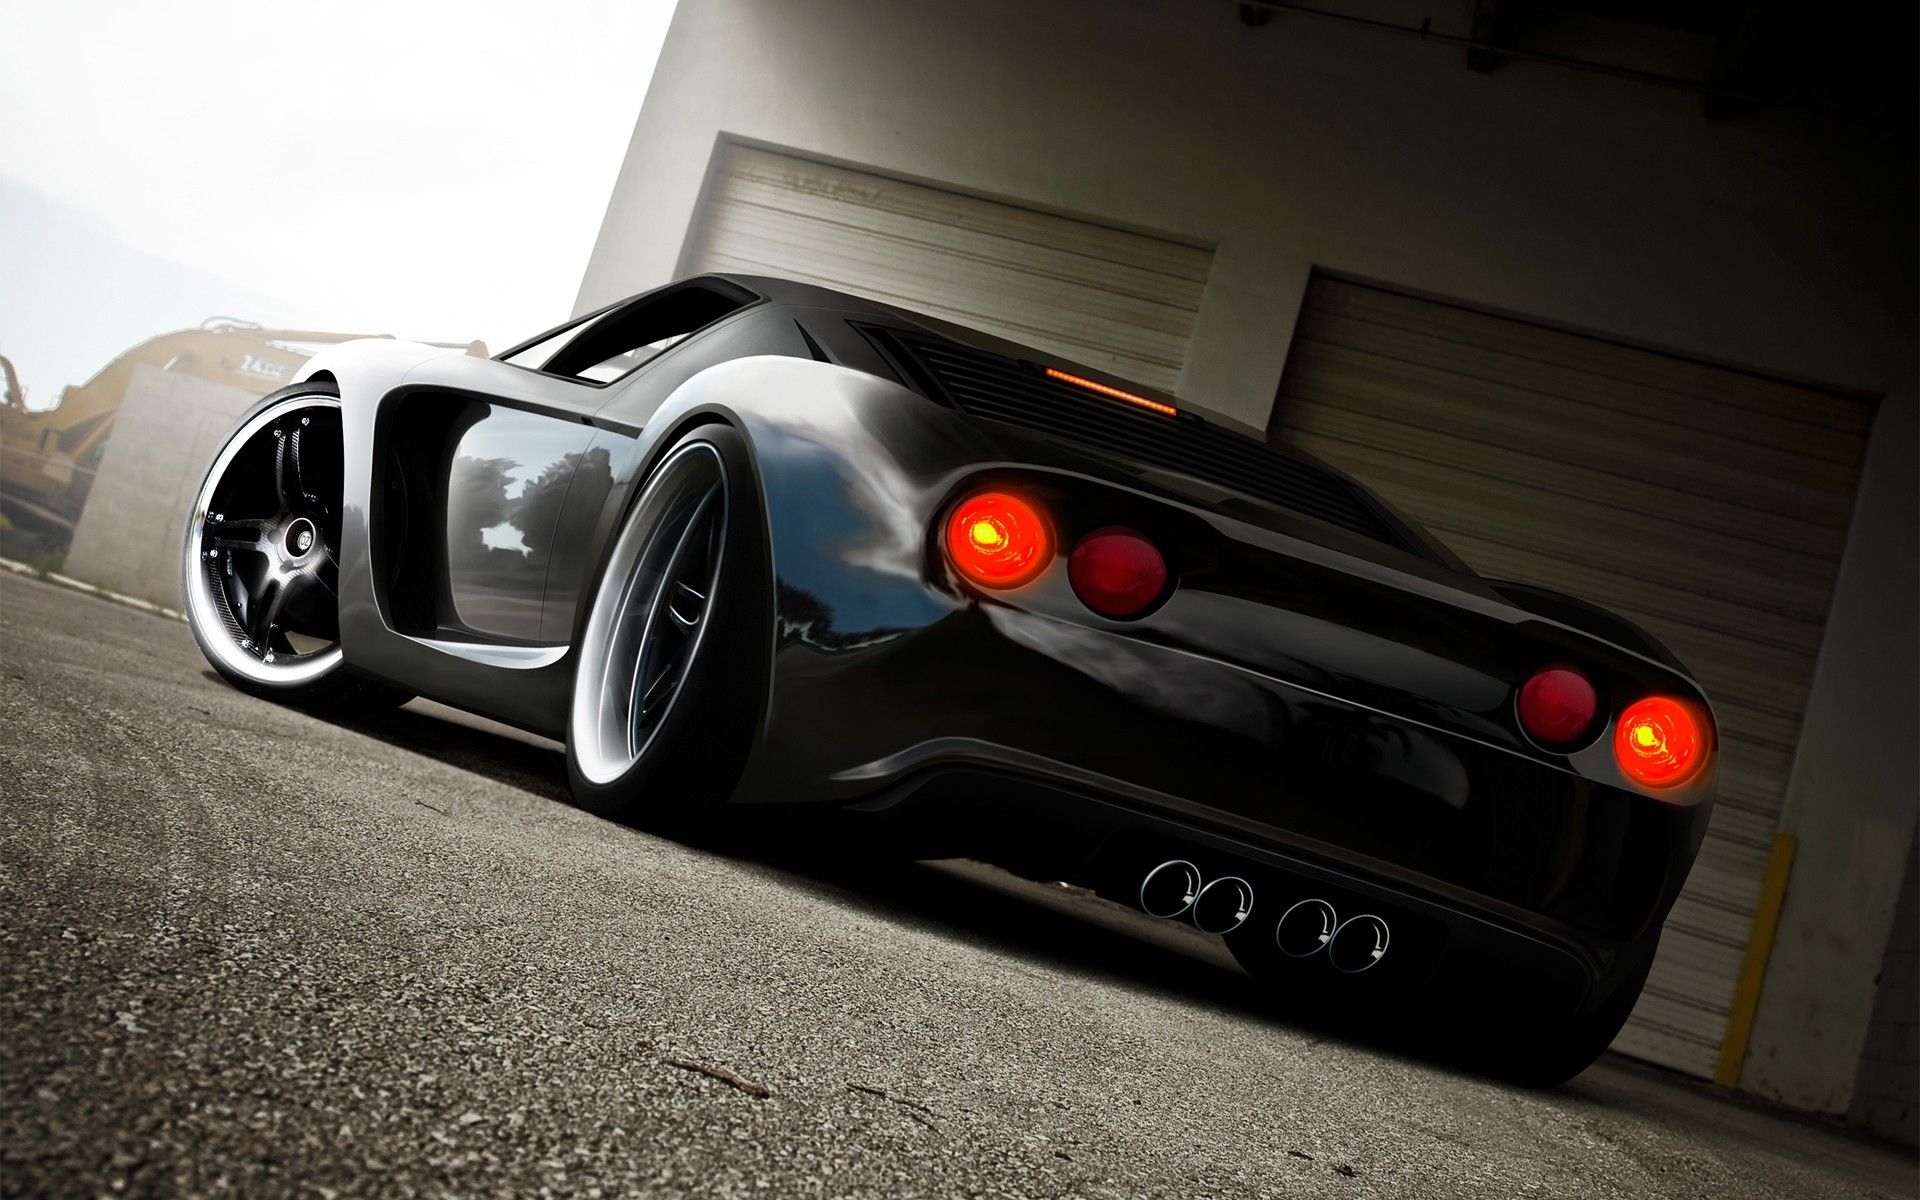 SuperCar Wallpaper: Trion Nemesis supercar to have 000 horsepower and 290 mph top speed